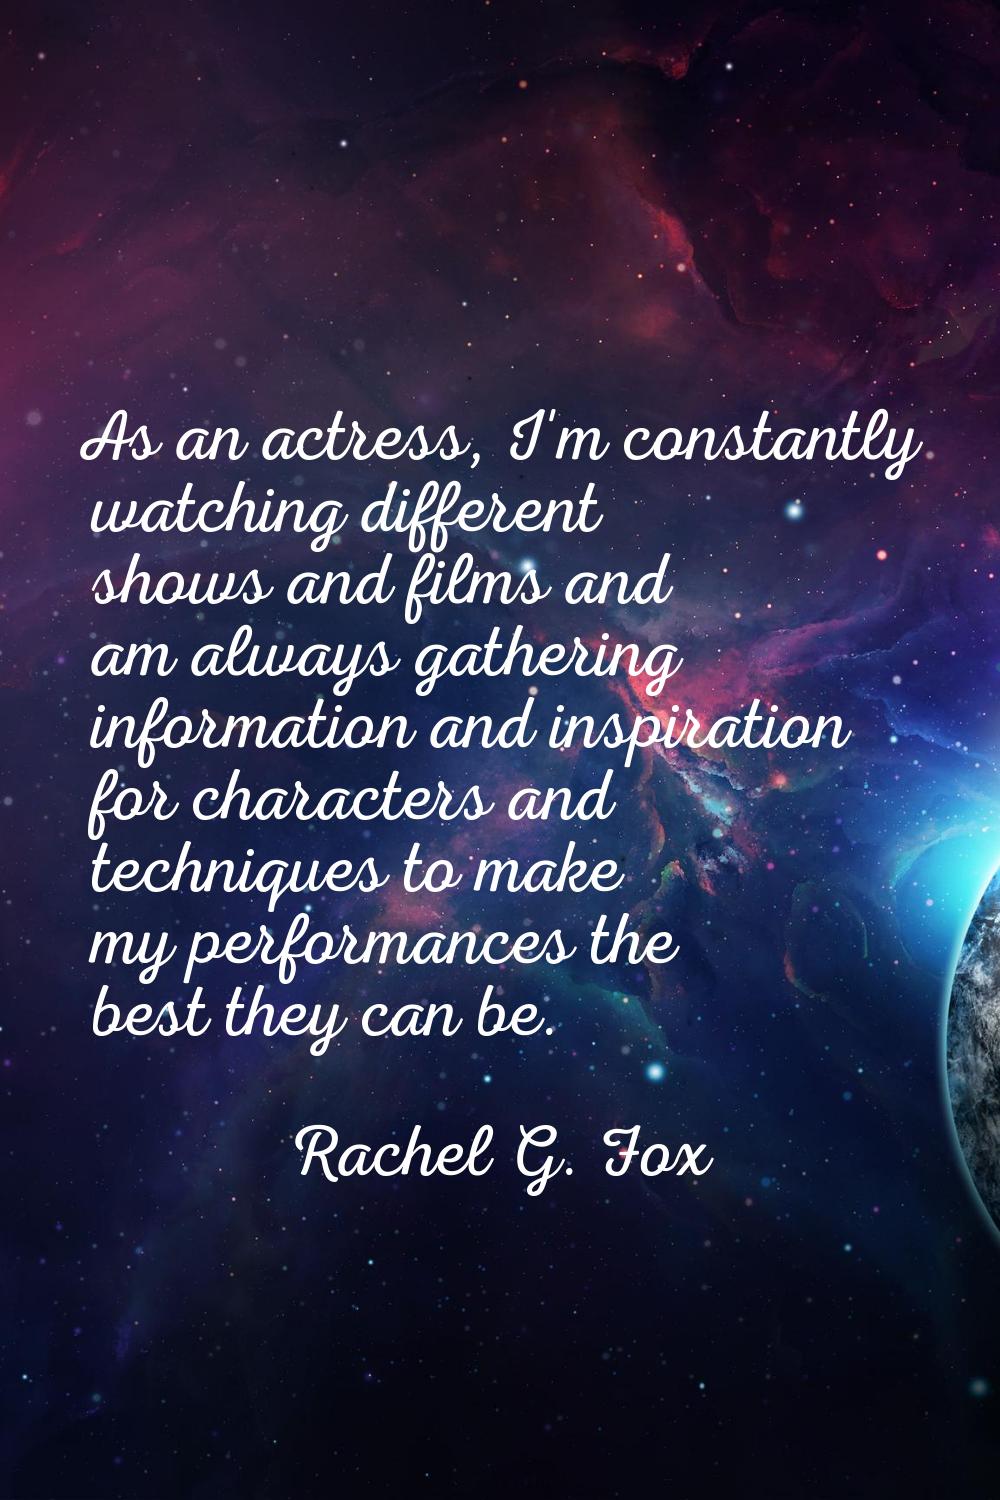 As an actress, I'm constantly watching different shows and films and am always gathering informatio